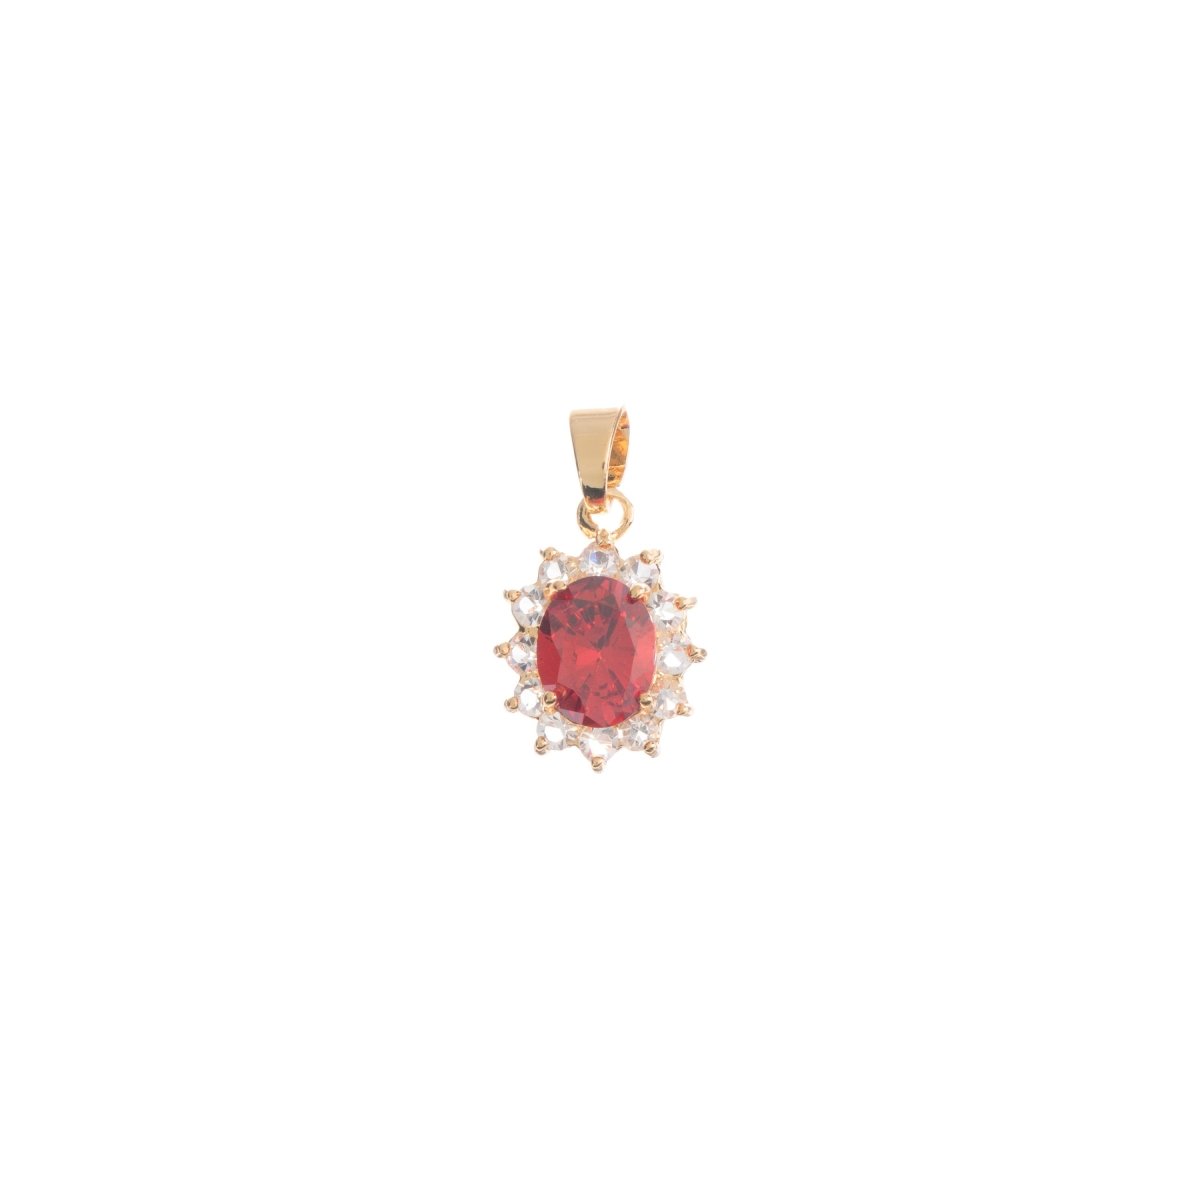 18K Gold Filled Charm, Multi-Colored Sun Cubic Zirconia Pendant with Colored CZ Crystal Gemstone, Pendant Birthstone For Jewelry Making I-040 J-256~J-261 - DLUXCA